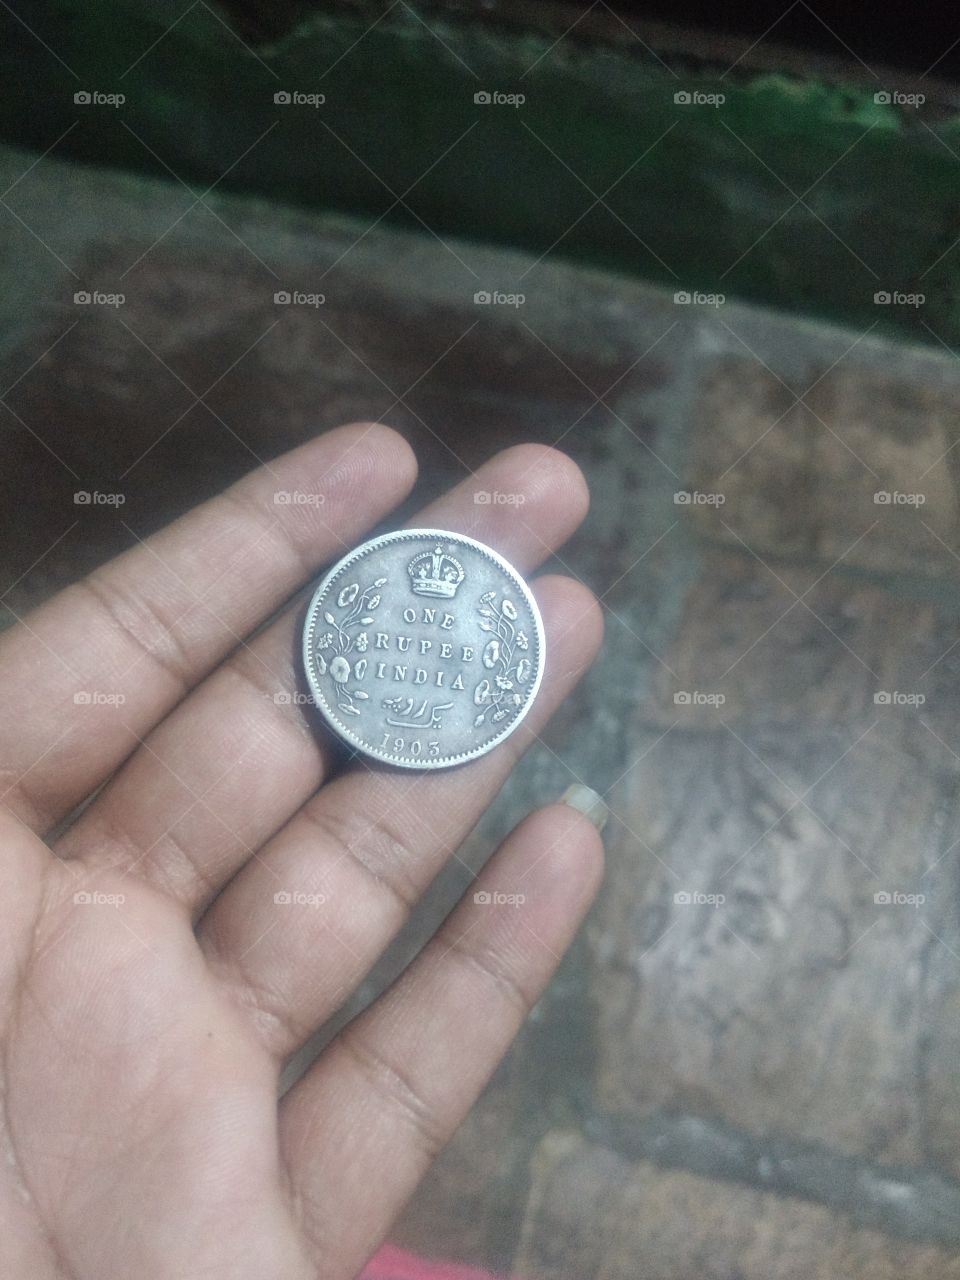 indian One rupee 1903